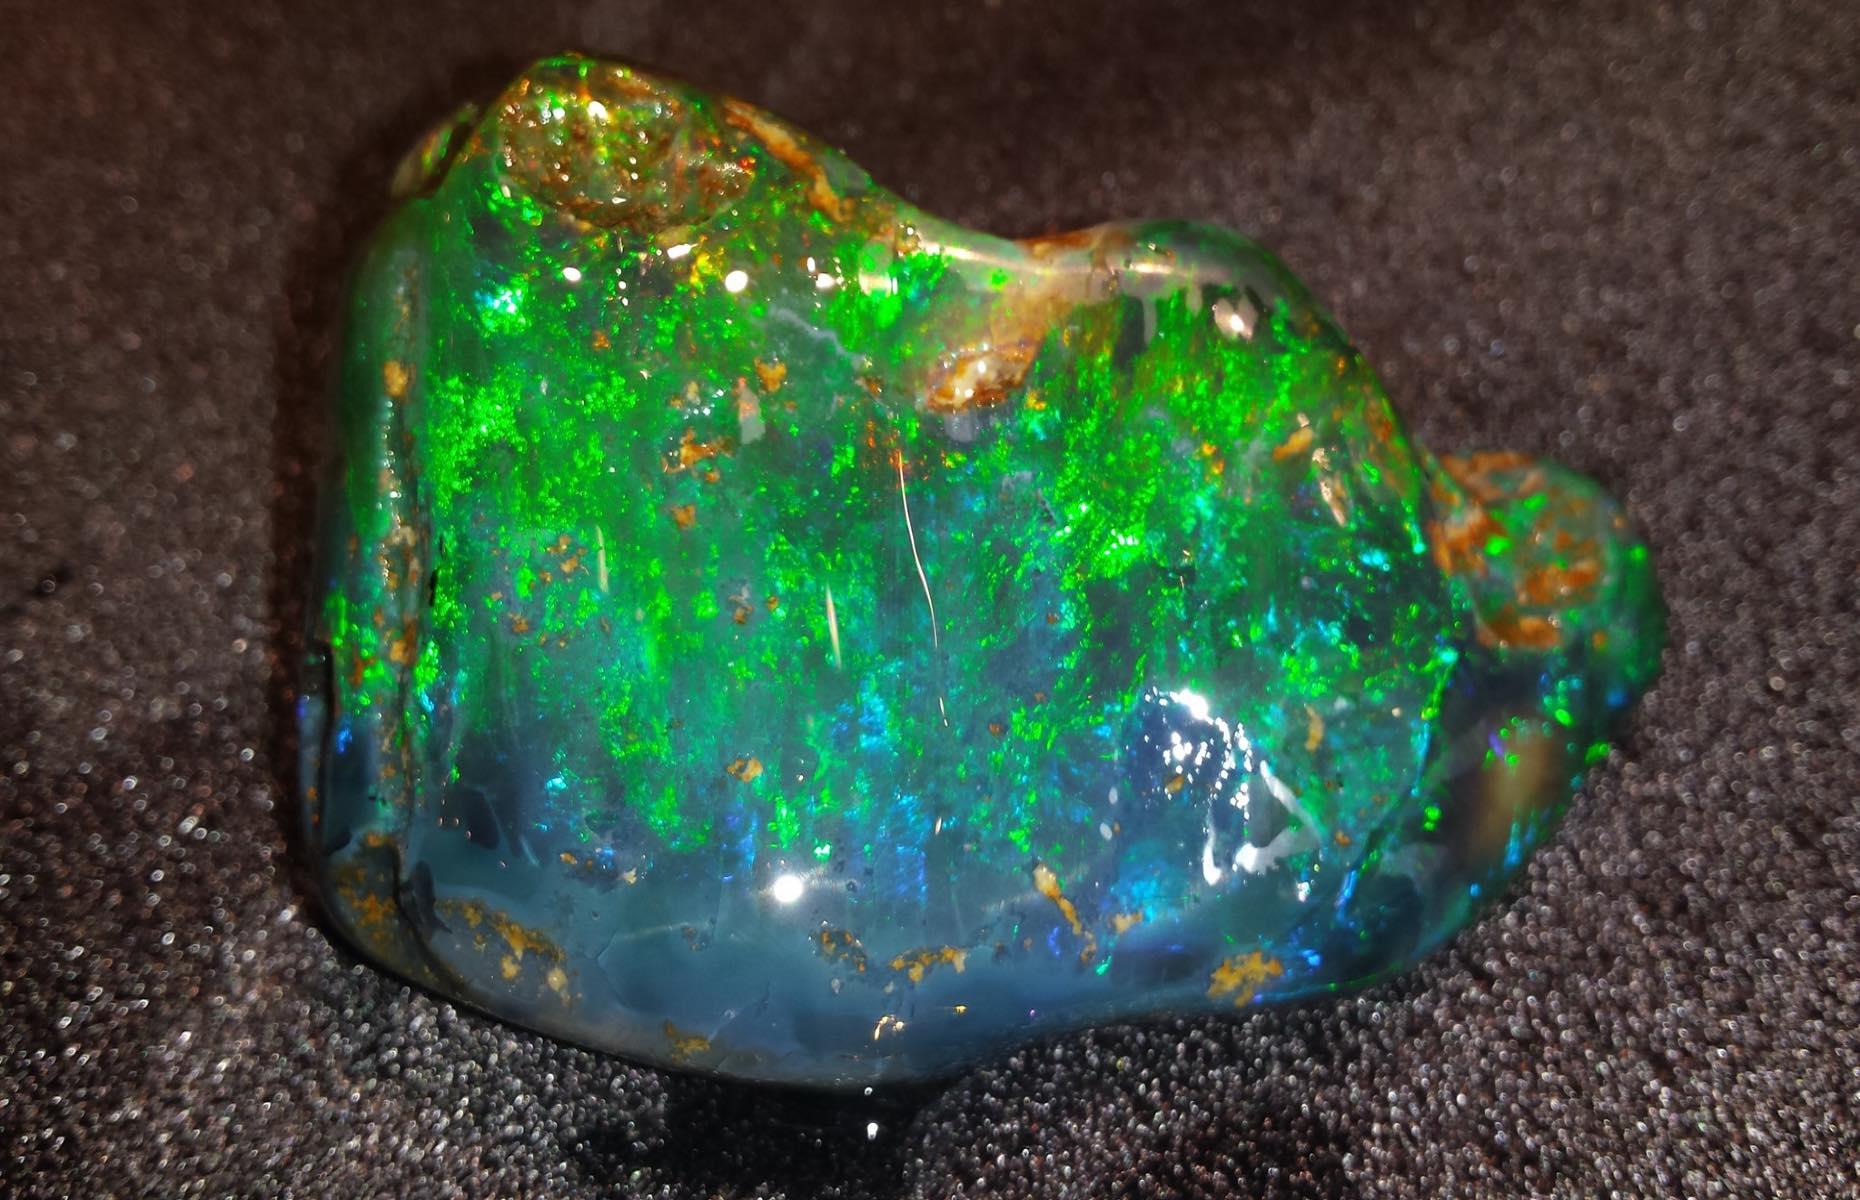 <p>Opal prospecting has been happening in Nevada since the early 1900s and <a href="https://www.nevadaopal.com">Rainbow Ridge Opal Mine</a>, located 30 miles (48km) southwest of Denio, is open for digs each summer. It offers 'tailings digging' (digging from material that has already been mined) which is ideal for beginners, as well as virgin ground loads (digging from fresh clay and dirt, knocked down from an excavator), which is great for more experienced rockhounds.</p>  <p><strong><a href="https://www.loveexploring.com/galleries/67994/the-eerie-american-gold-rush-ghost-towns-you-can-visit">Discover America's eeriest Gold Rush ghost towns</a></strong></p>